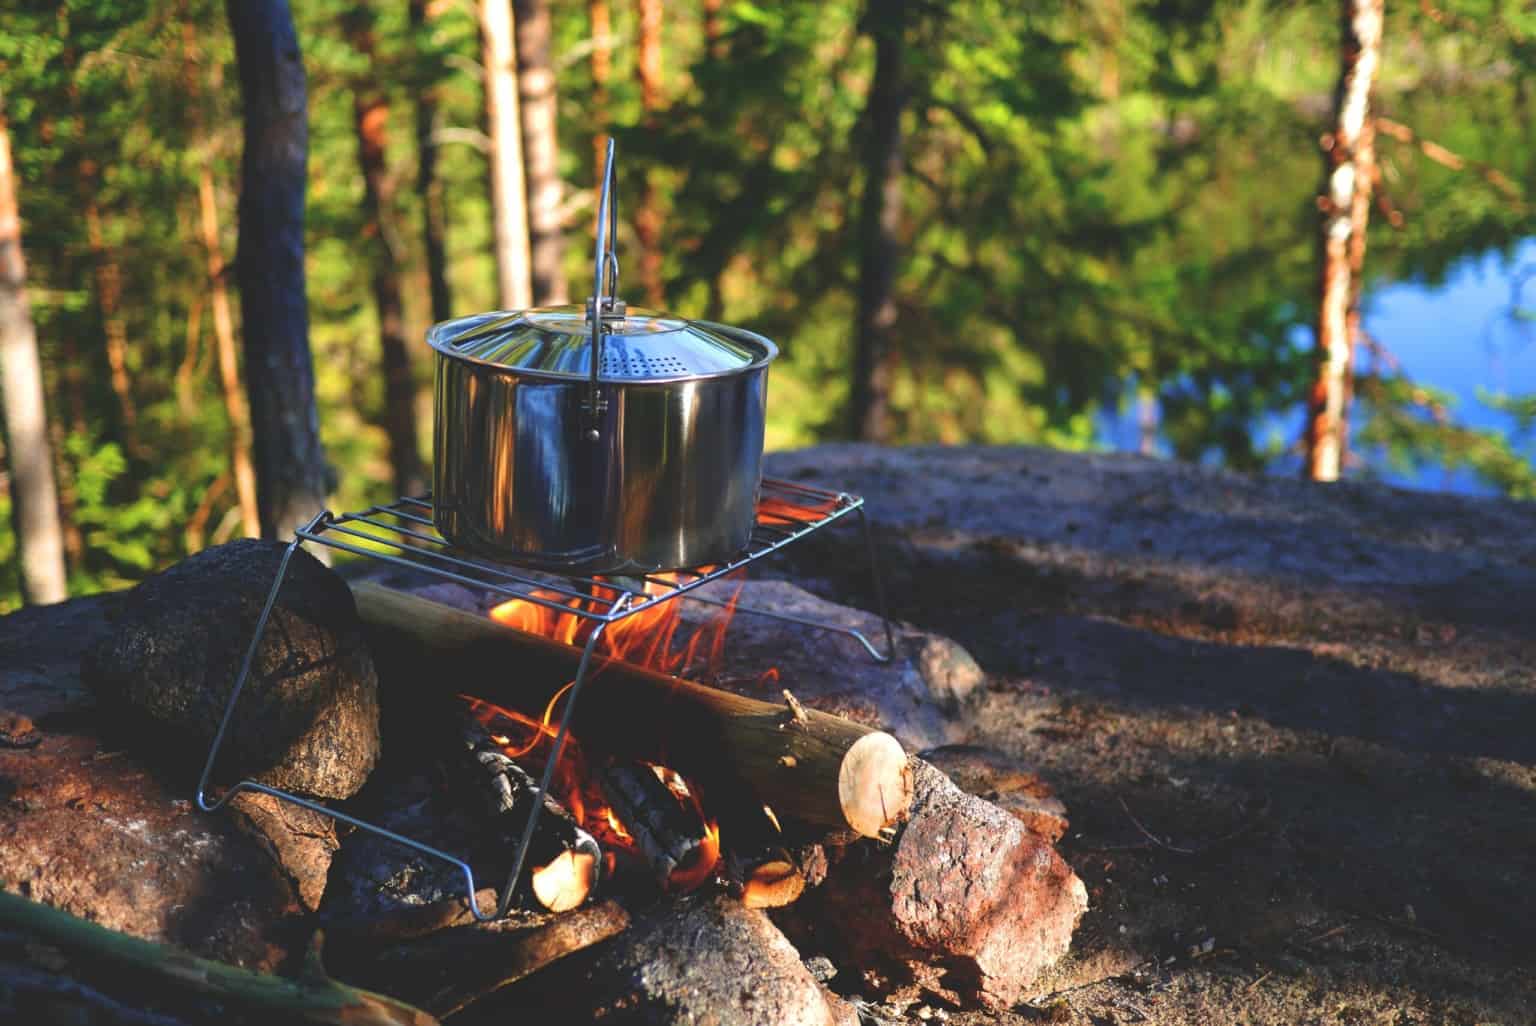 Accessing nature through camping should be accessible to everyone. | Image by LUM3N from Pixabay